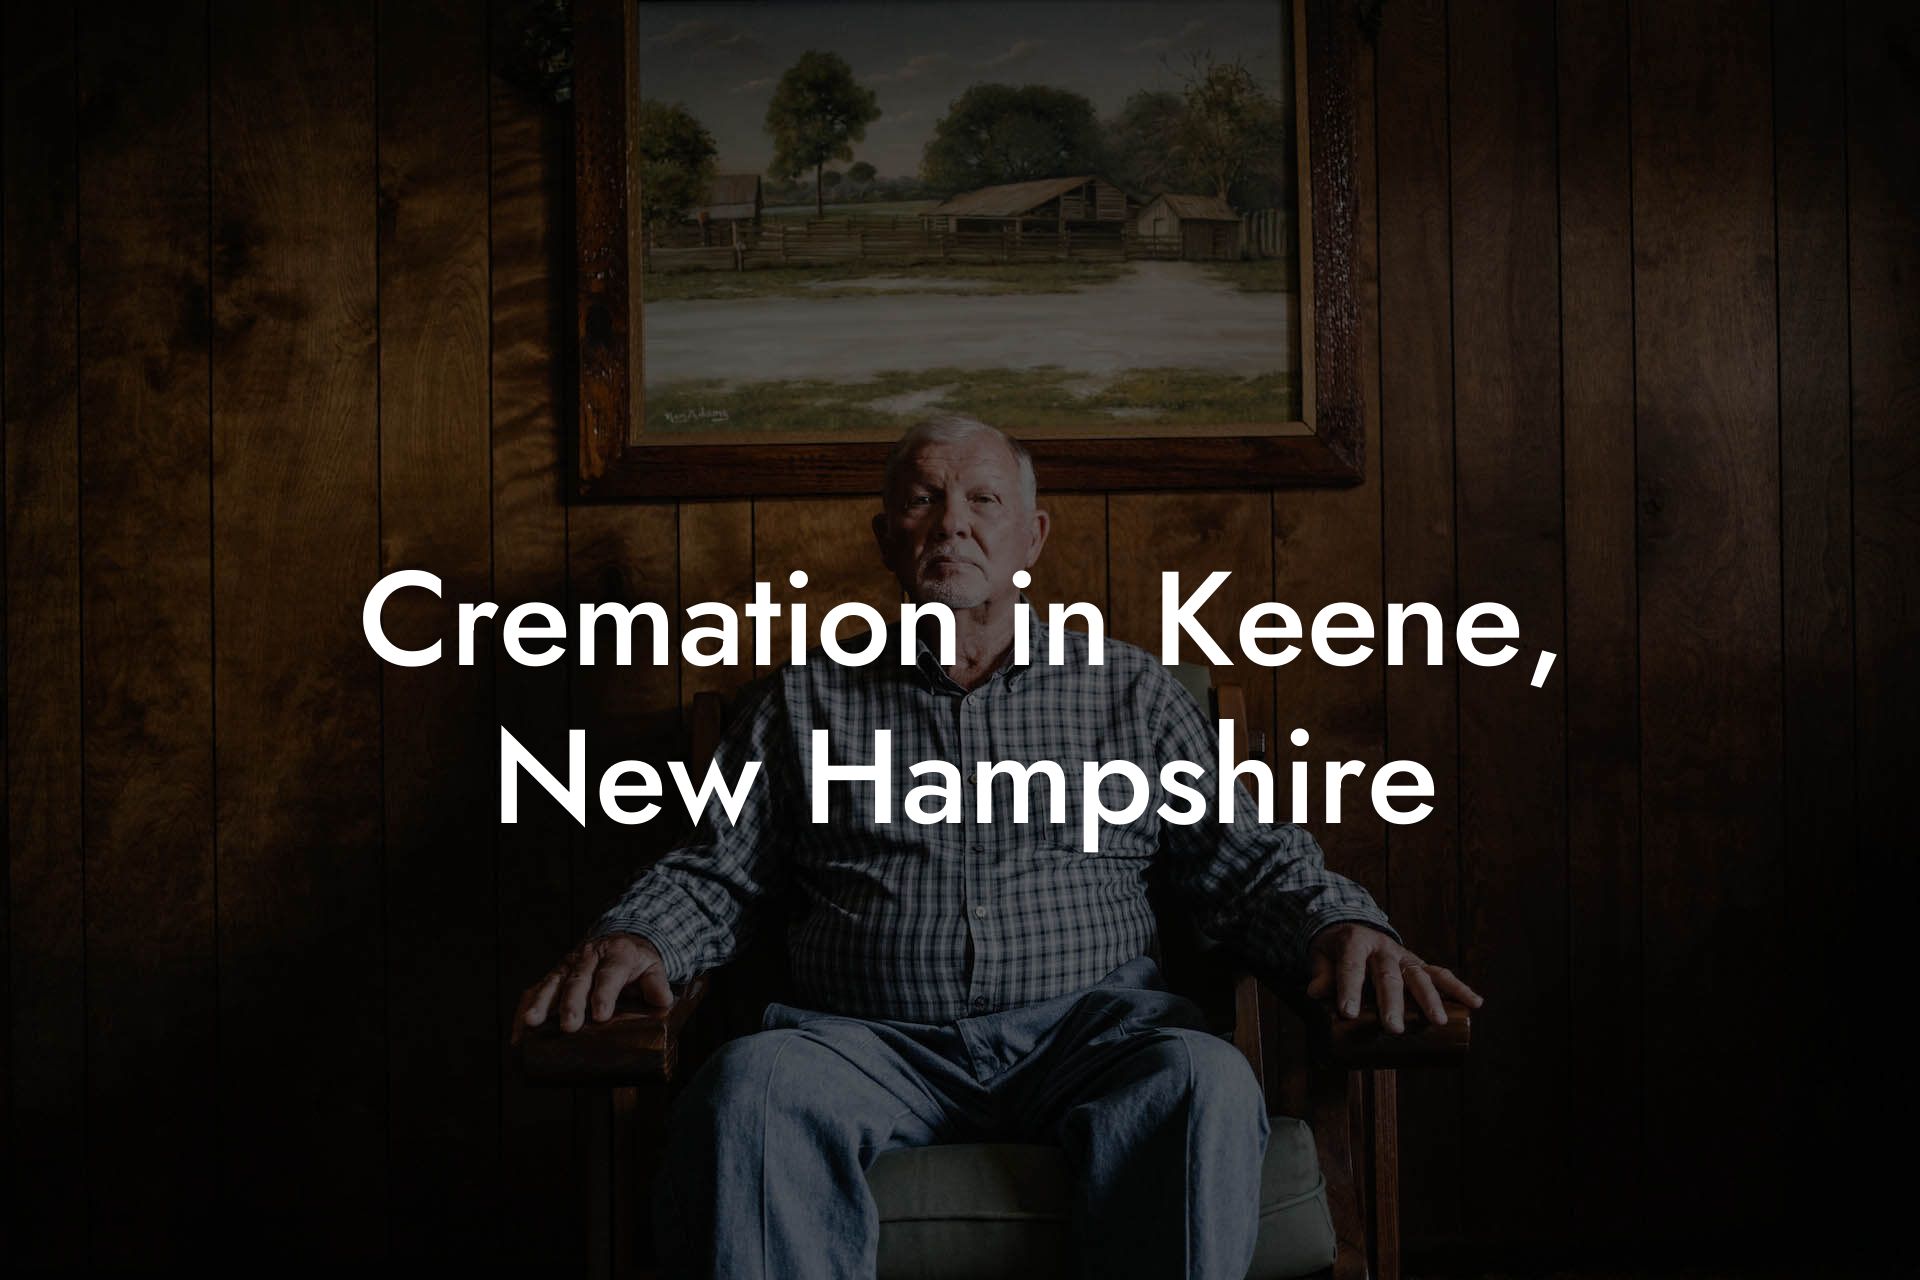 Cremation in Keene, New Hampshire